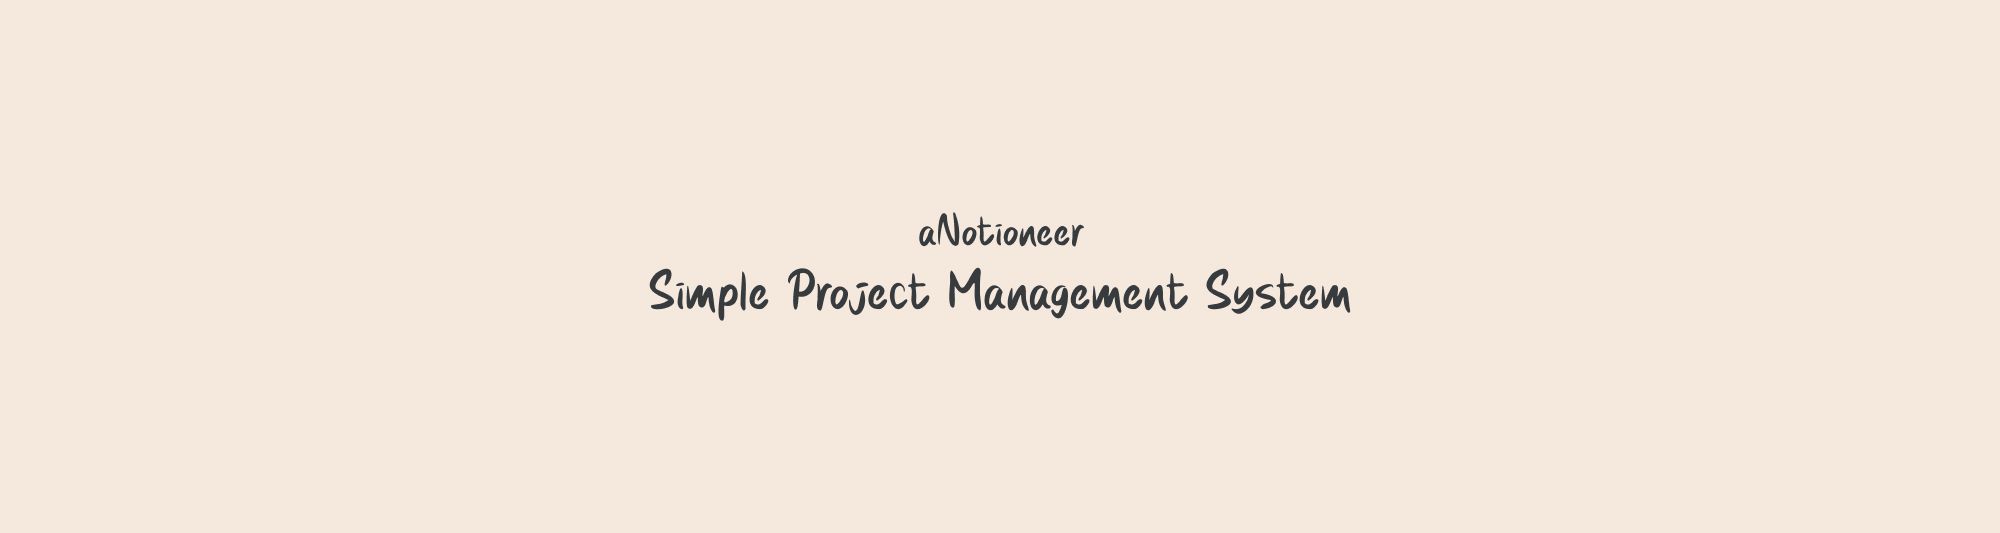 Simple Project Management System